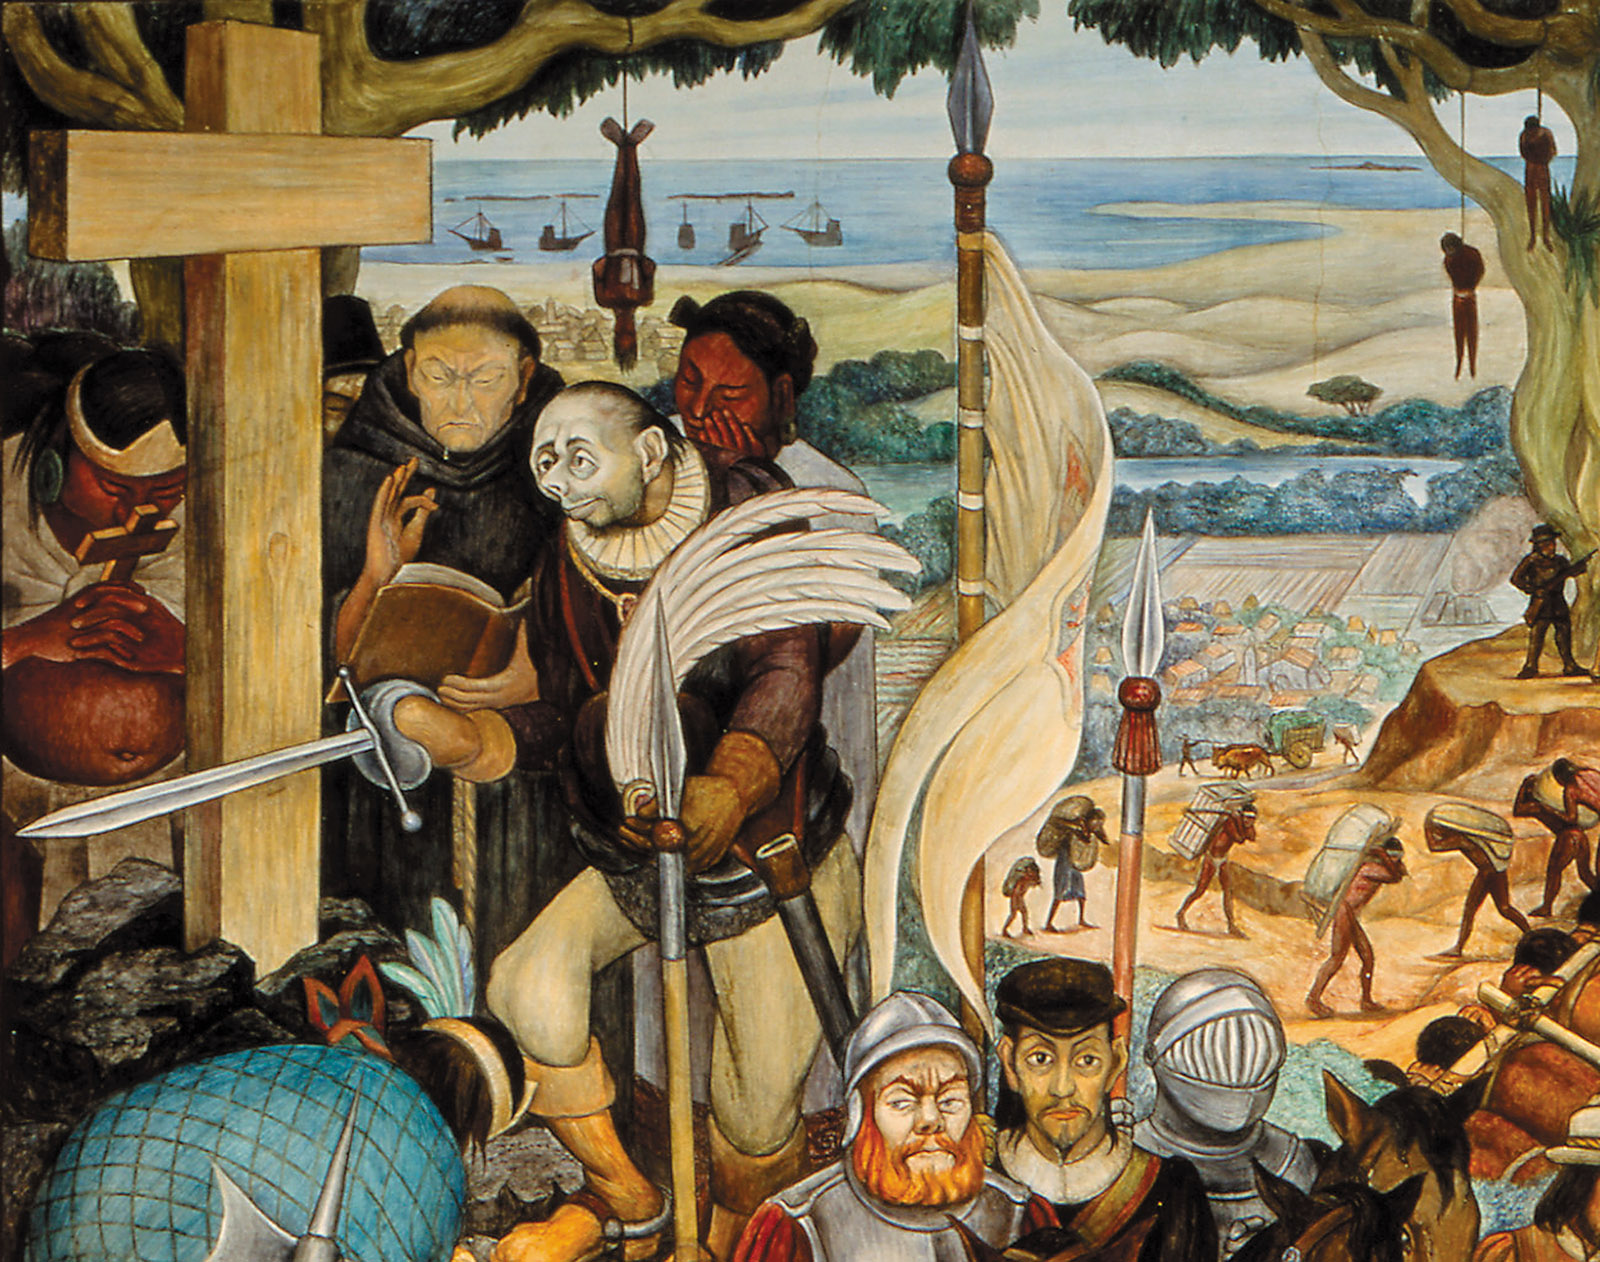 The Curse of Cortés | Álvaro Enrigue | The New York Review of Books